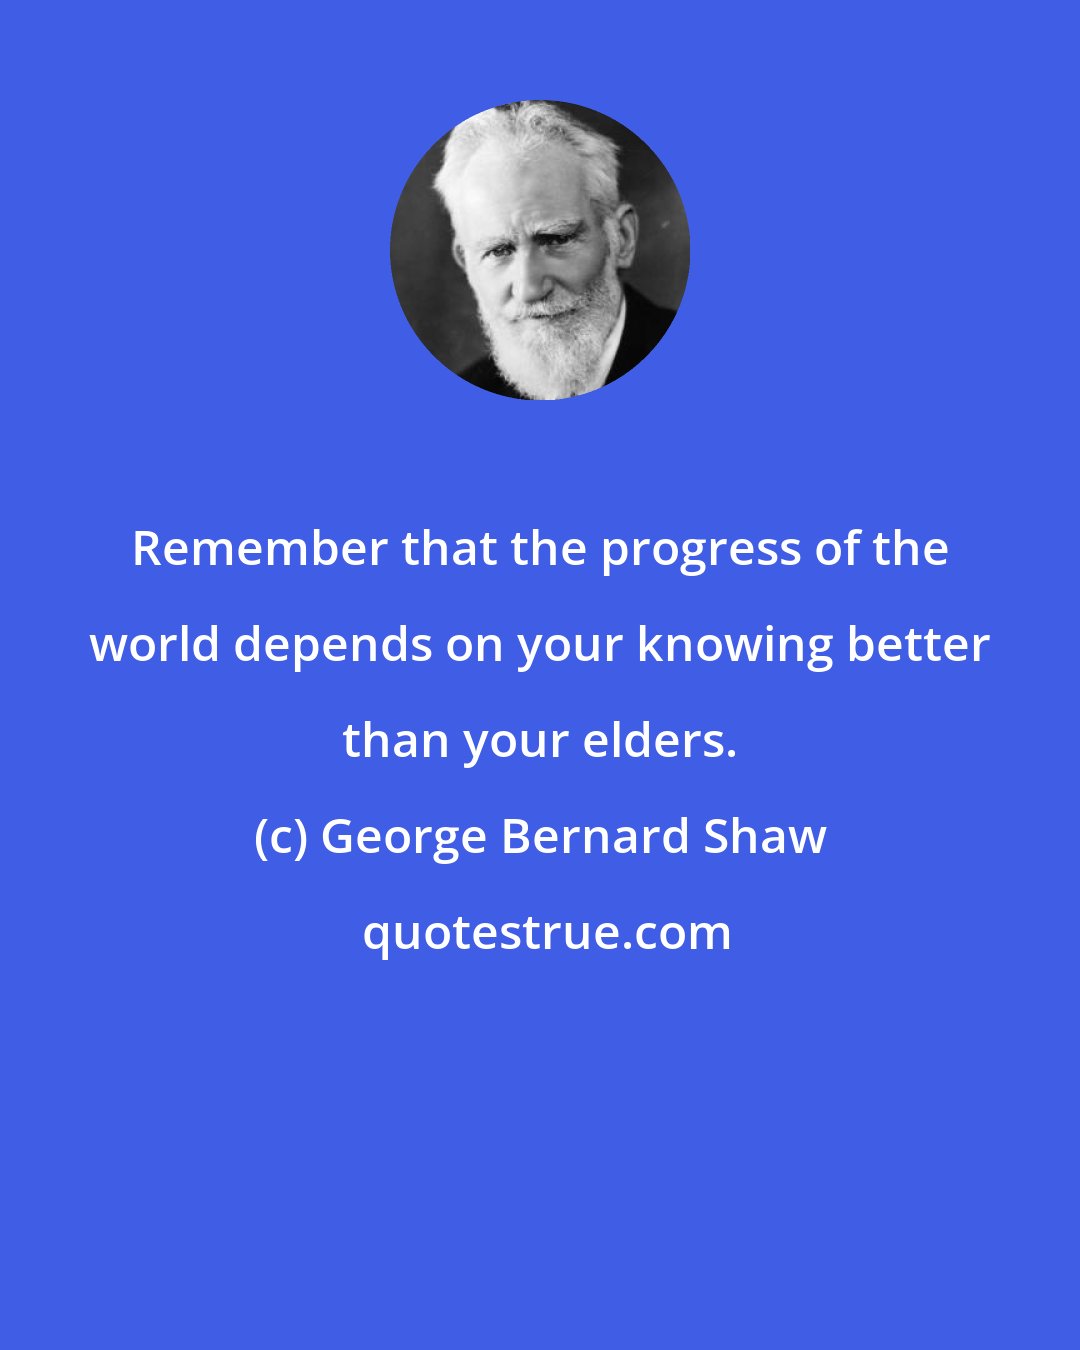 George Bernard Shaw: Remember that the progress of the world depends on your knowing better than your elders.